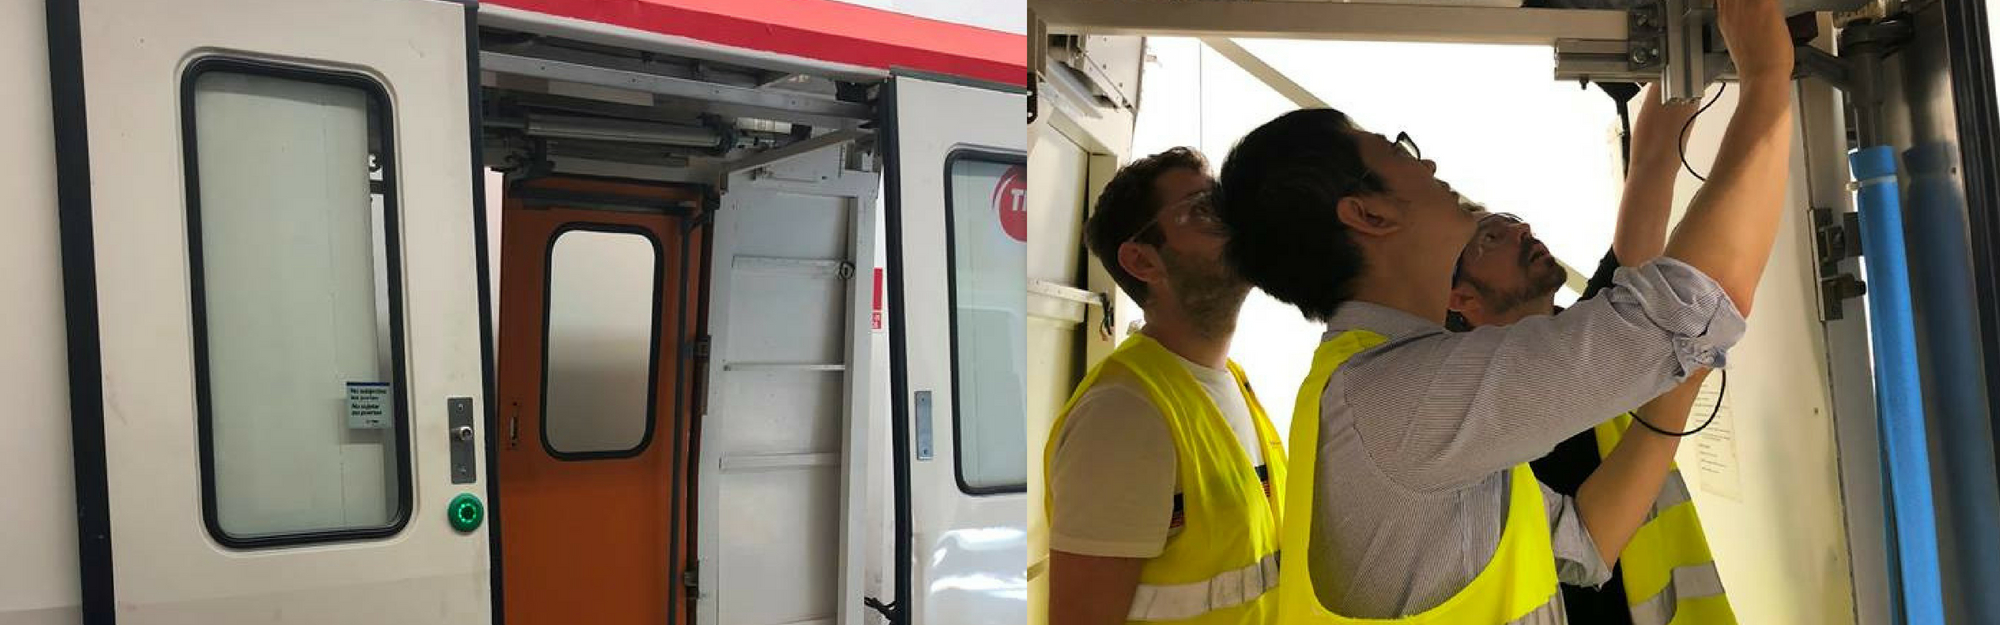 Project news: VA-RCM: The consortium behind the VA-RCM project visit Faiveley Transport in Reus (near Barcelona) to perform tests with the system